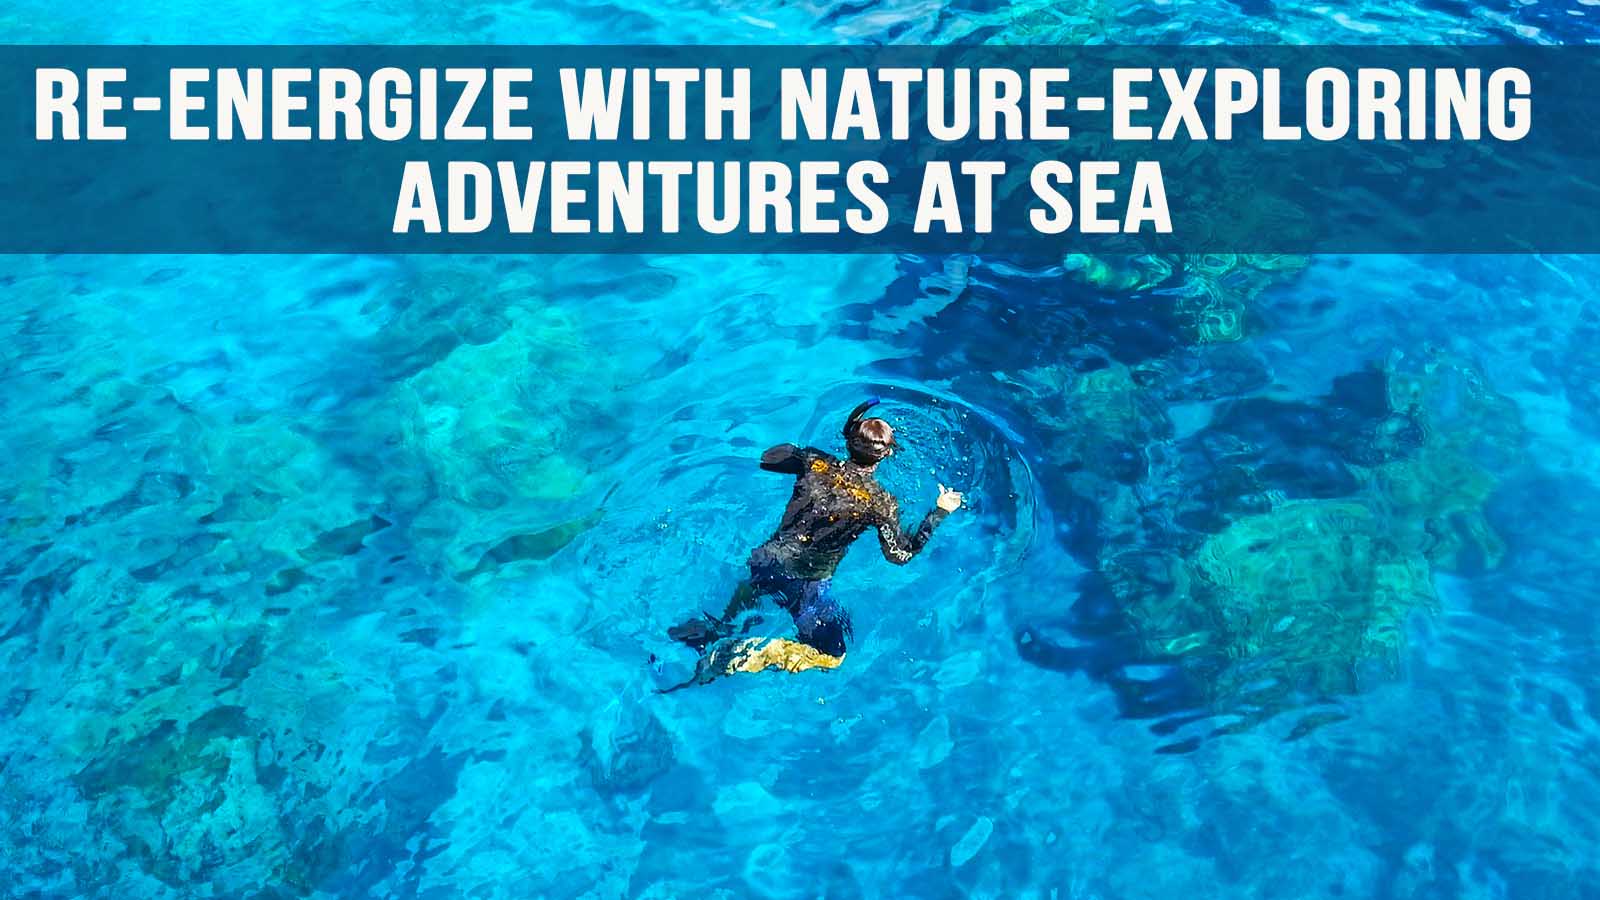 Re-energize with Nature-Exploring adventures at Sea